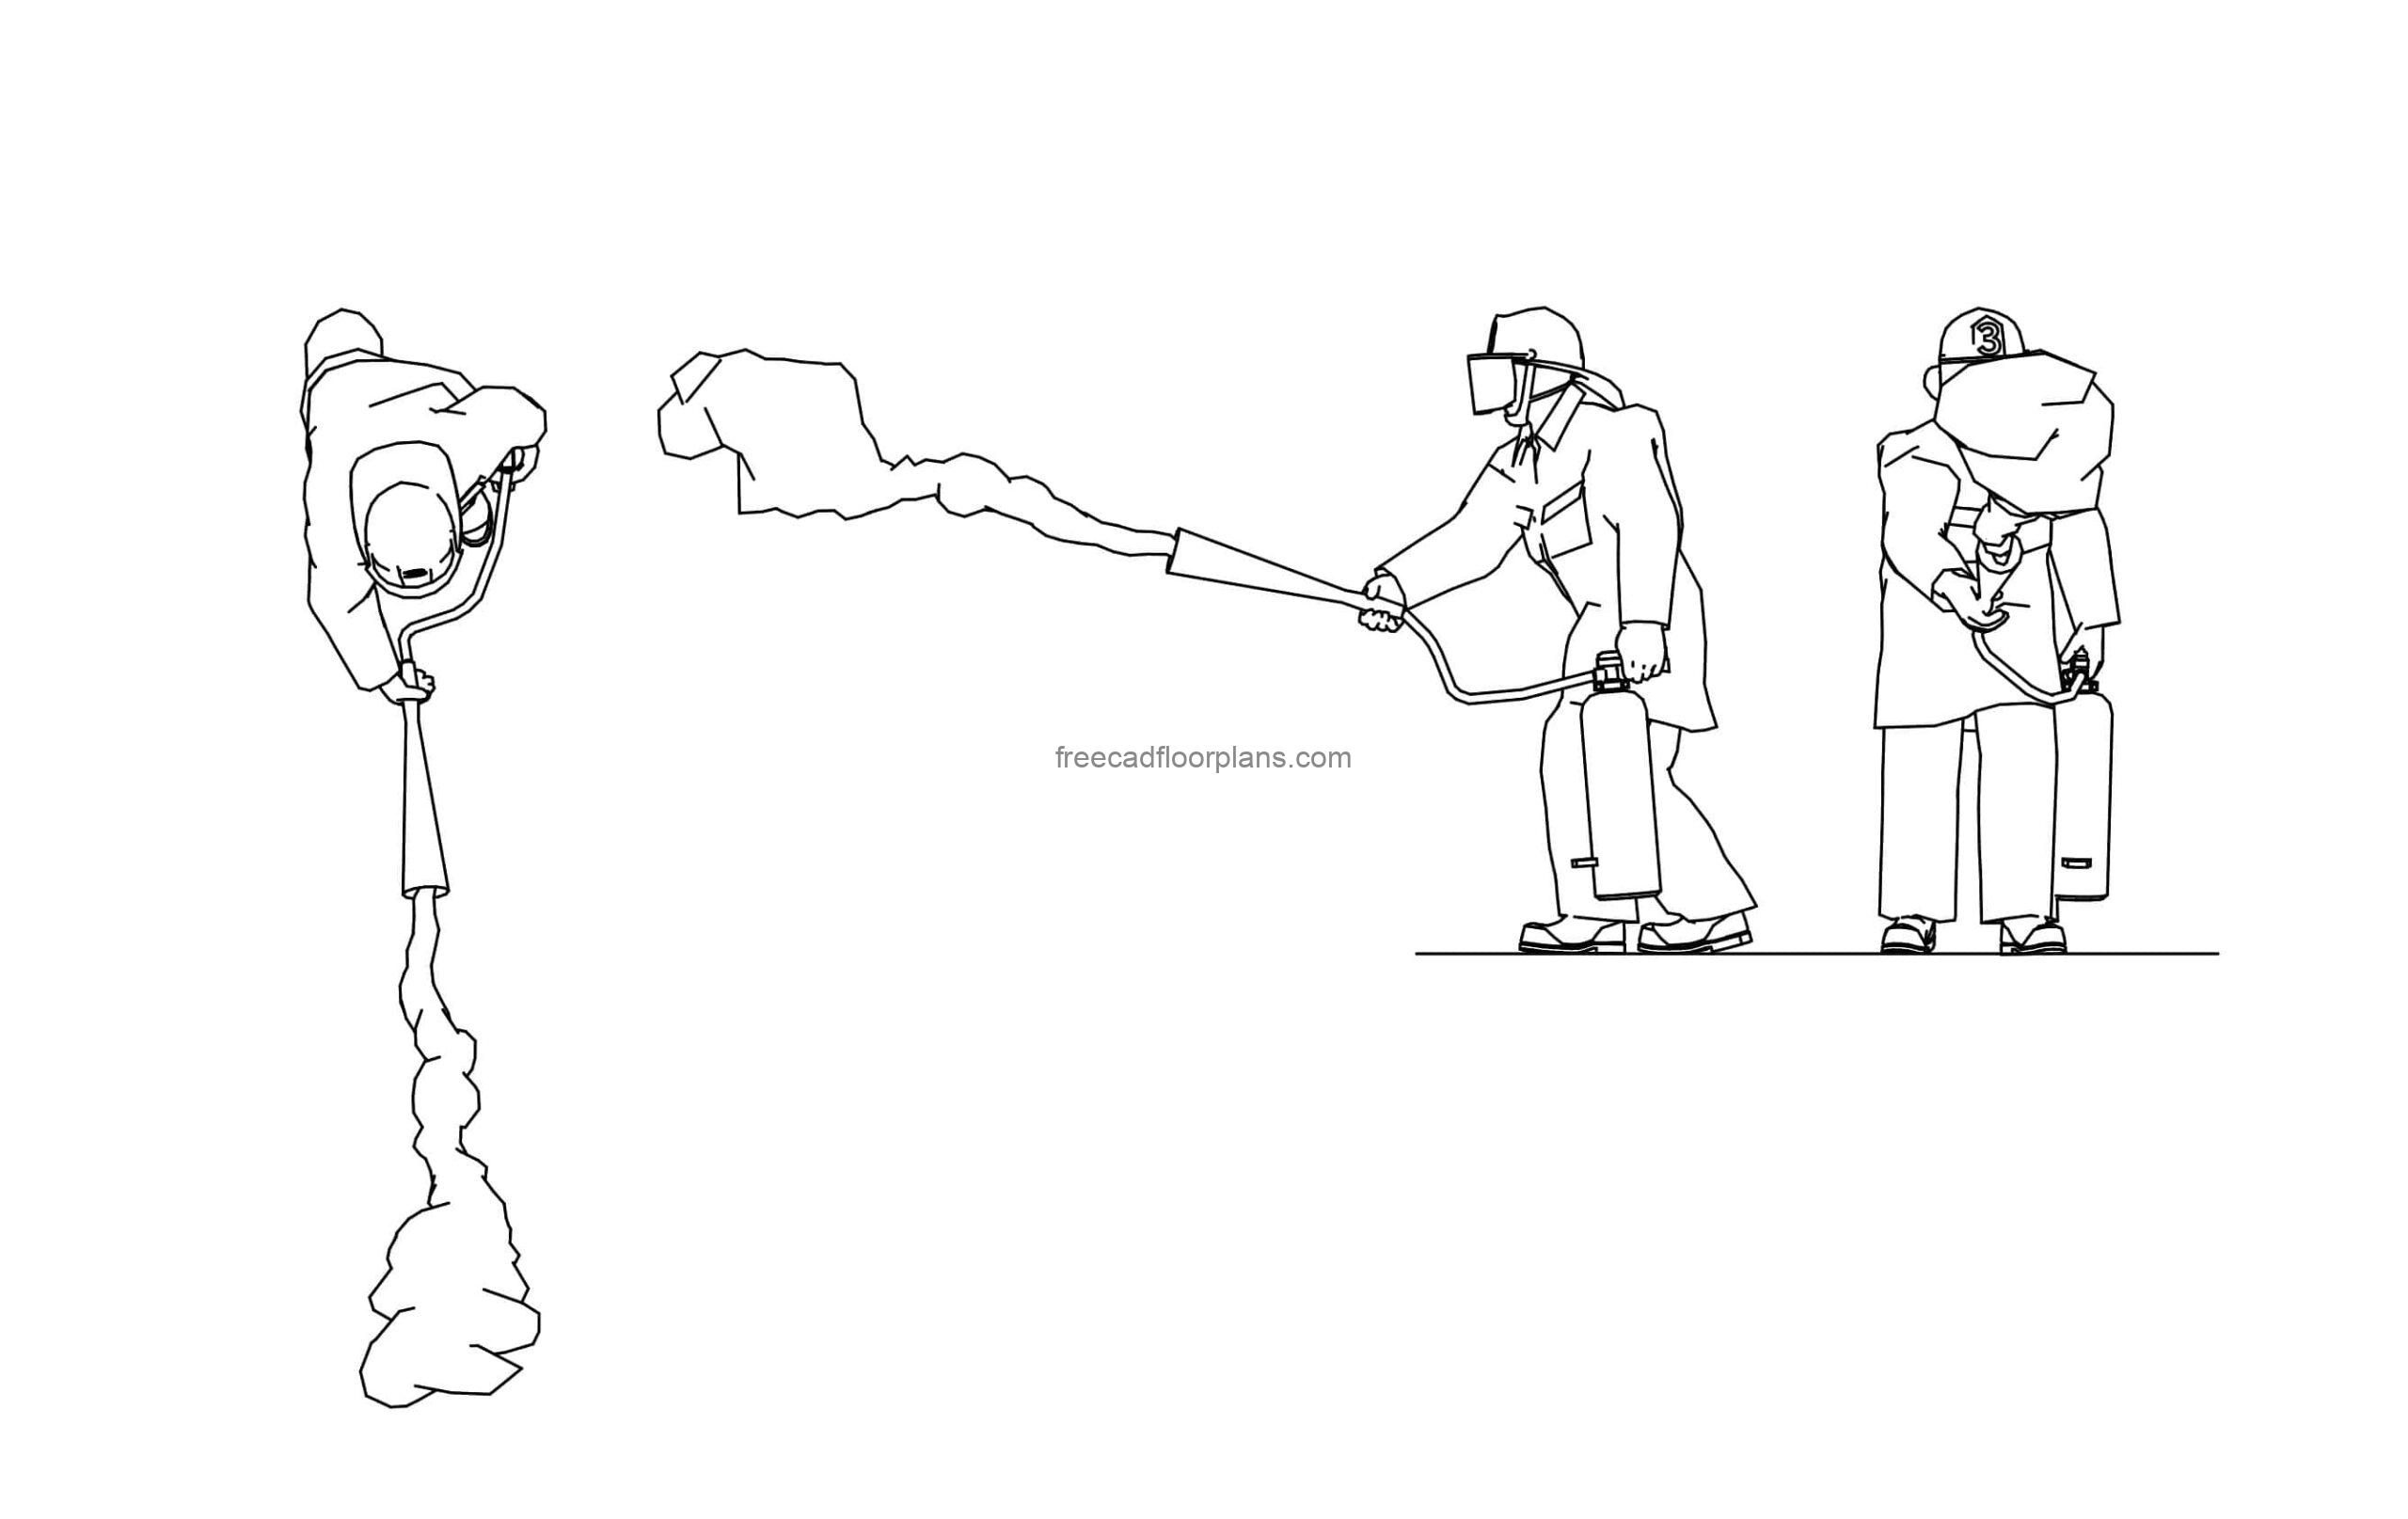 Firefighter with fire extinguisher drawing cad block front, views side and plan